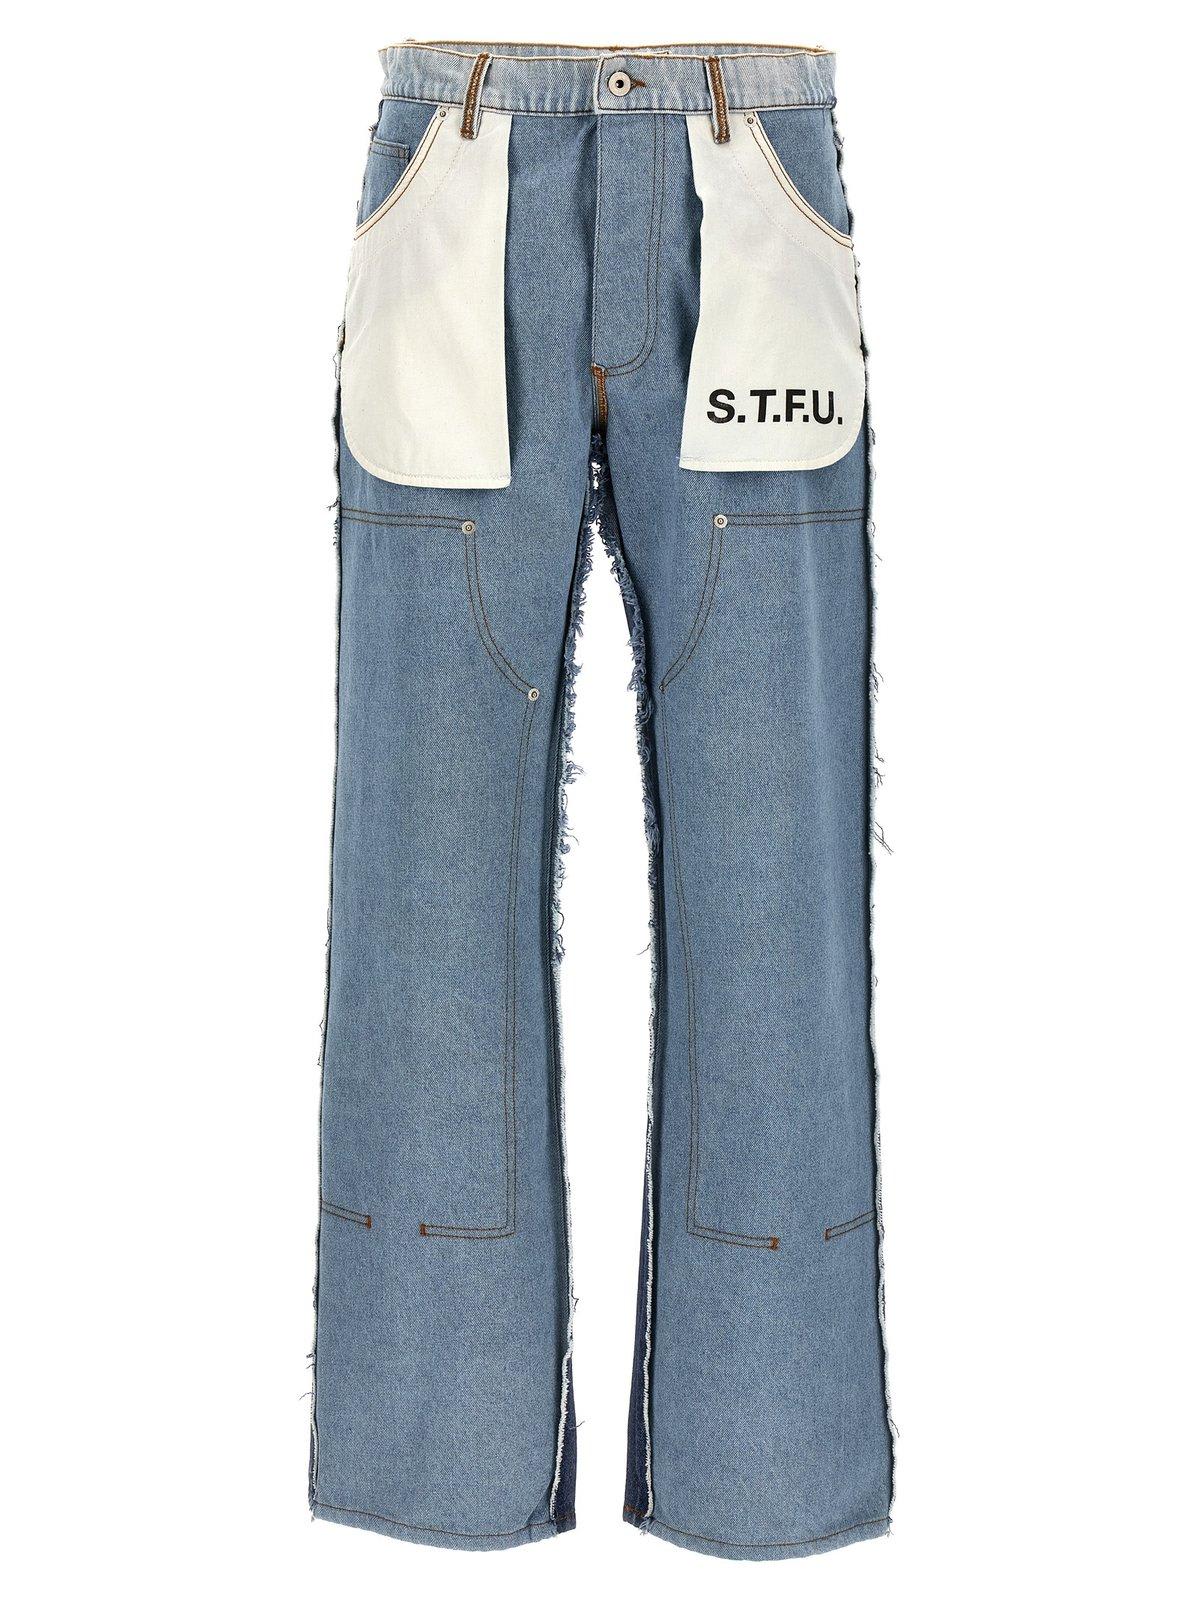 HERON PRESTON Frayed Two-toned Jeans